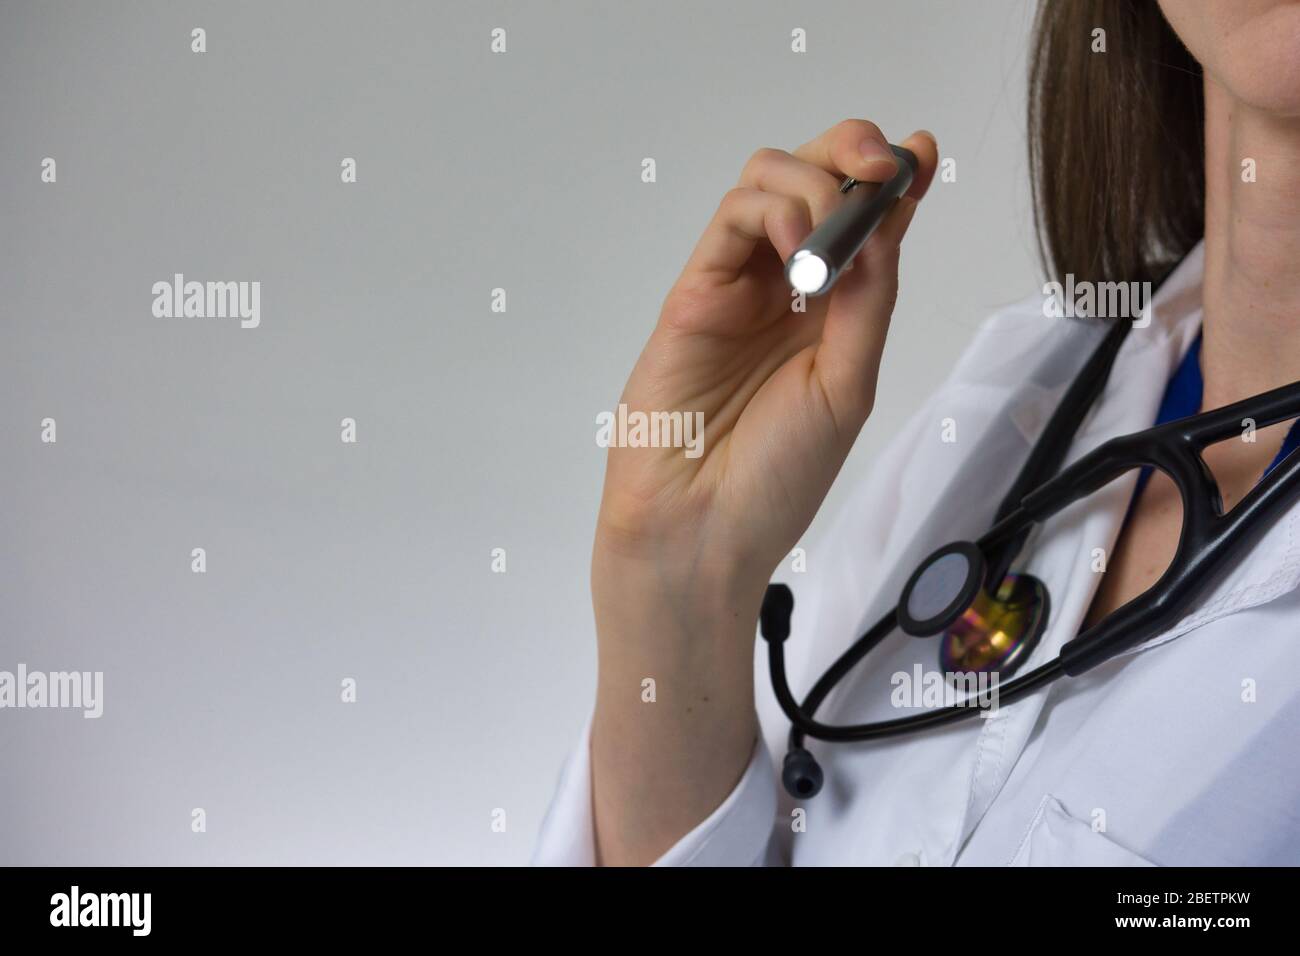 Medical professional with pen light isolated on grey background. Stethoscope and white coat visible. Room for type and copy Stock Photo